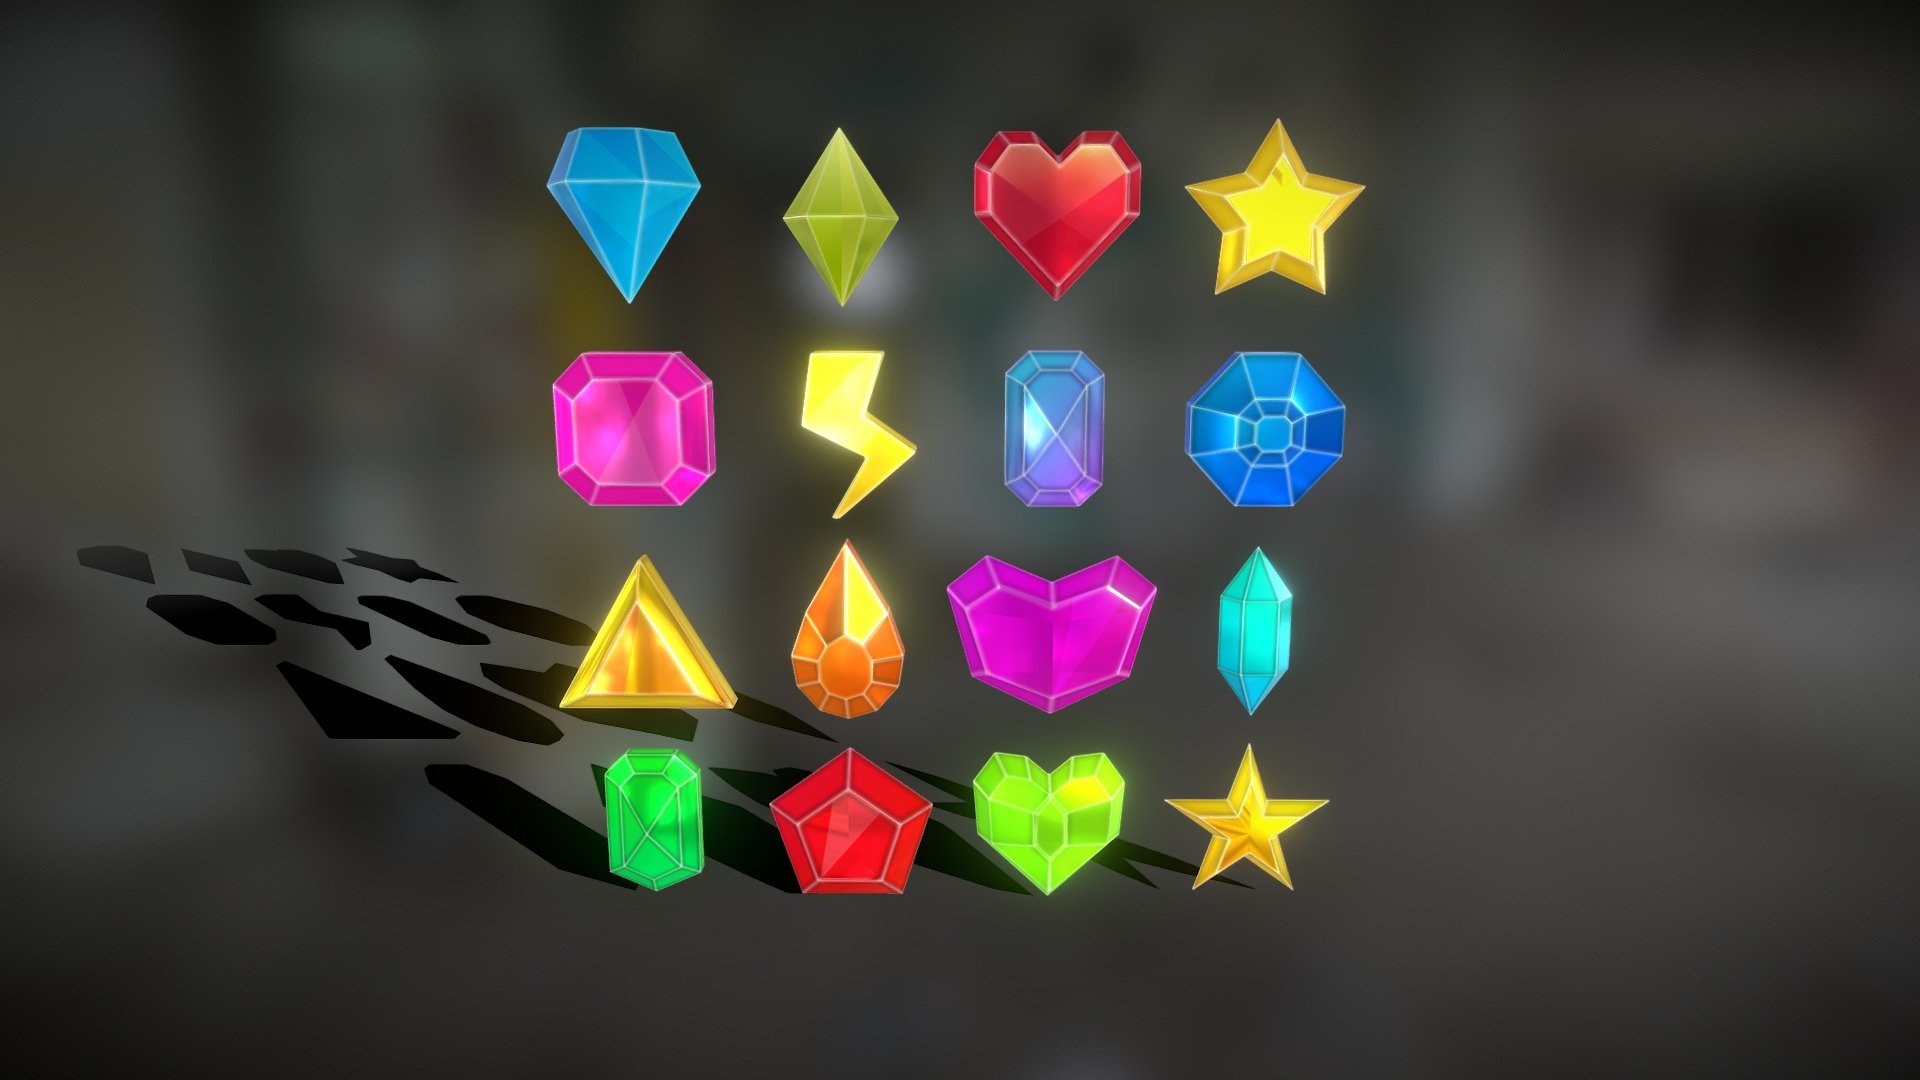 Low Poly Crystal Gems - Game Obstacles - powerups

License: StandardStandard
Source format: fbx
Uploaded Size: 19.6M
Download size: 18MB

-Geometry-
Triangles: 226
Quads: 1.3k
Total triangles: 3.1k
Total Vertices: 1.6k
PBR Metalness 
Textures: 18
Materials: 16
UV Layers: Yes
Vertex colors: No
Animations: 1
Rigged geometries: No
Morph geometries: 0
Scale transformations: No - Low Poly Crystal Gems - Game Powerups - Buy Royalty Free 3D model by srikanthsamba 3d model